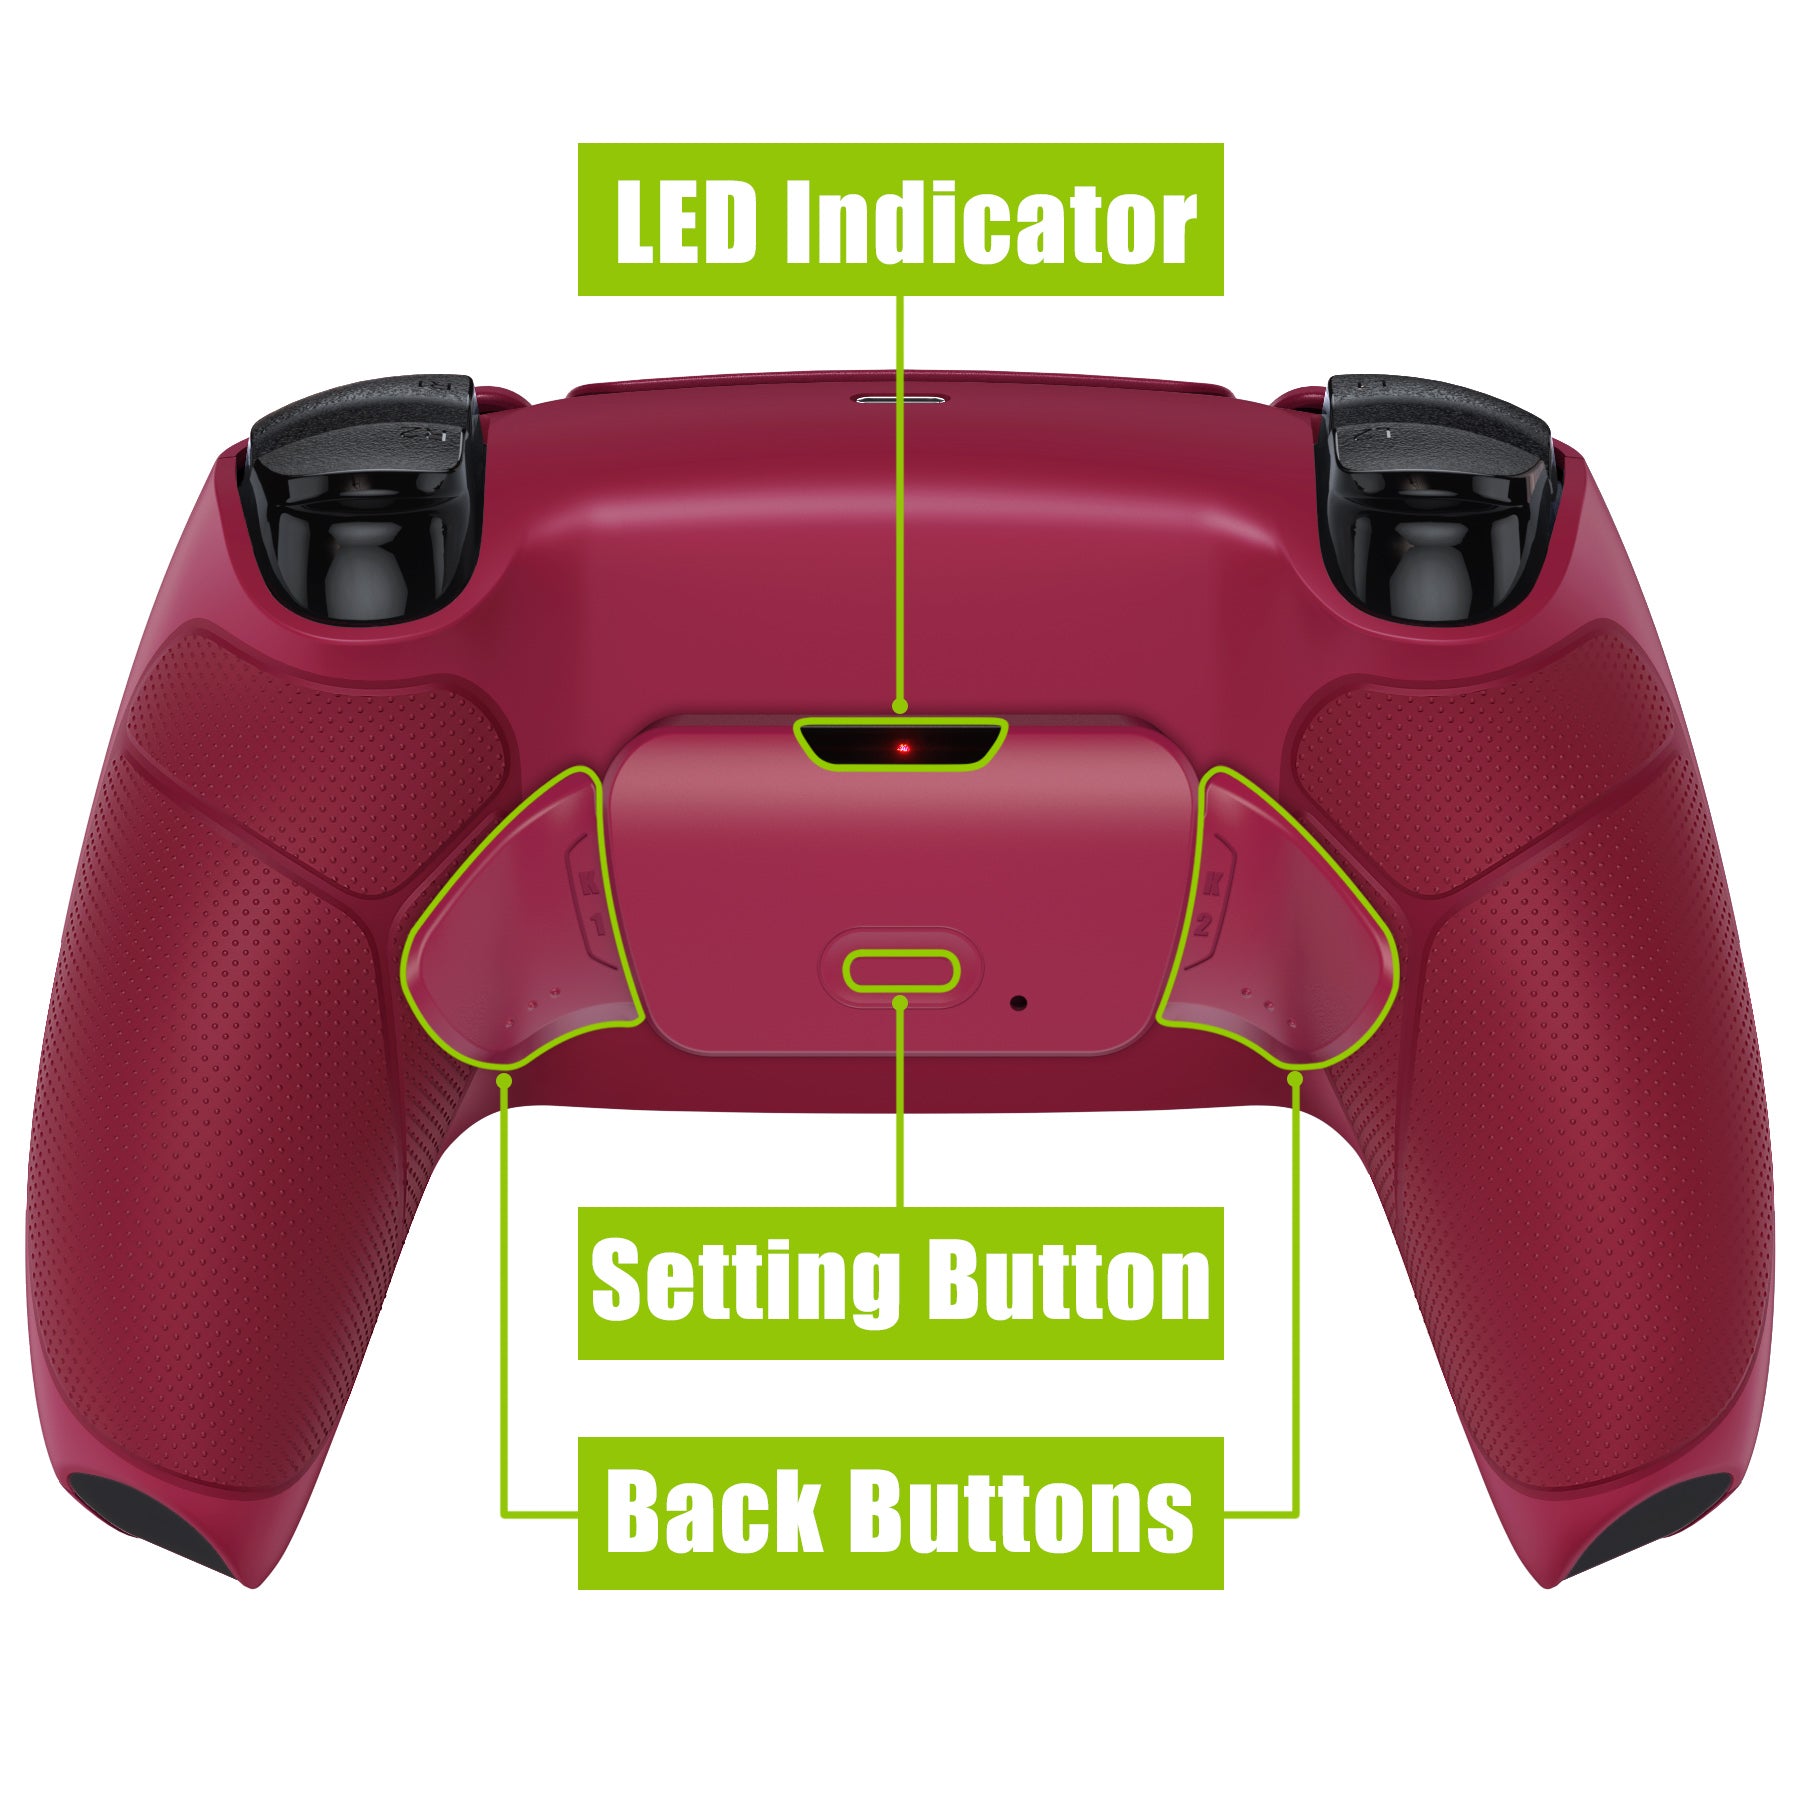 eXtremeRate Retail Cosmic Red Rubberized Grip Back Paddles Remappable Rise Remap Kit with Upgrade Board & Redesigned Back Shell & Back Buttons Attachment for PS5 Controller BDM-010 & BDM-020 - XPFU6008